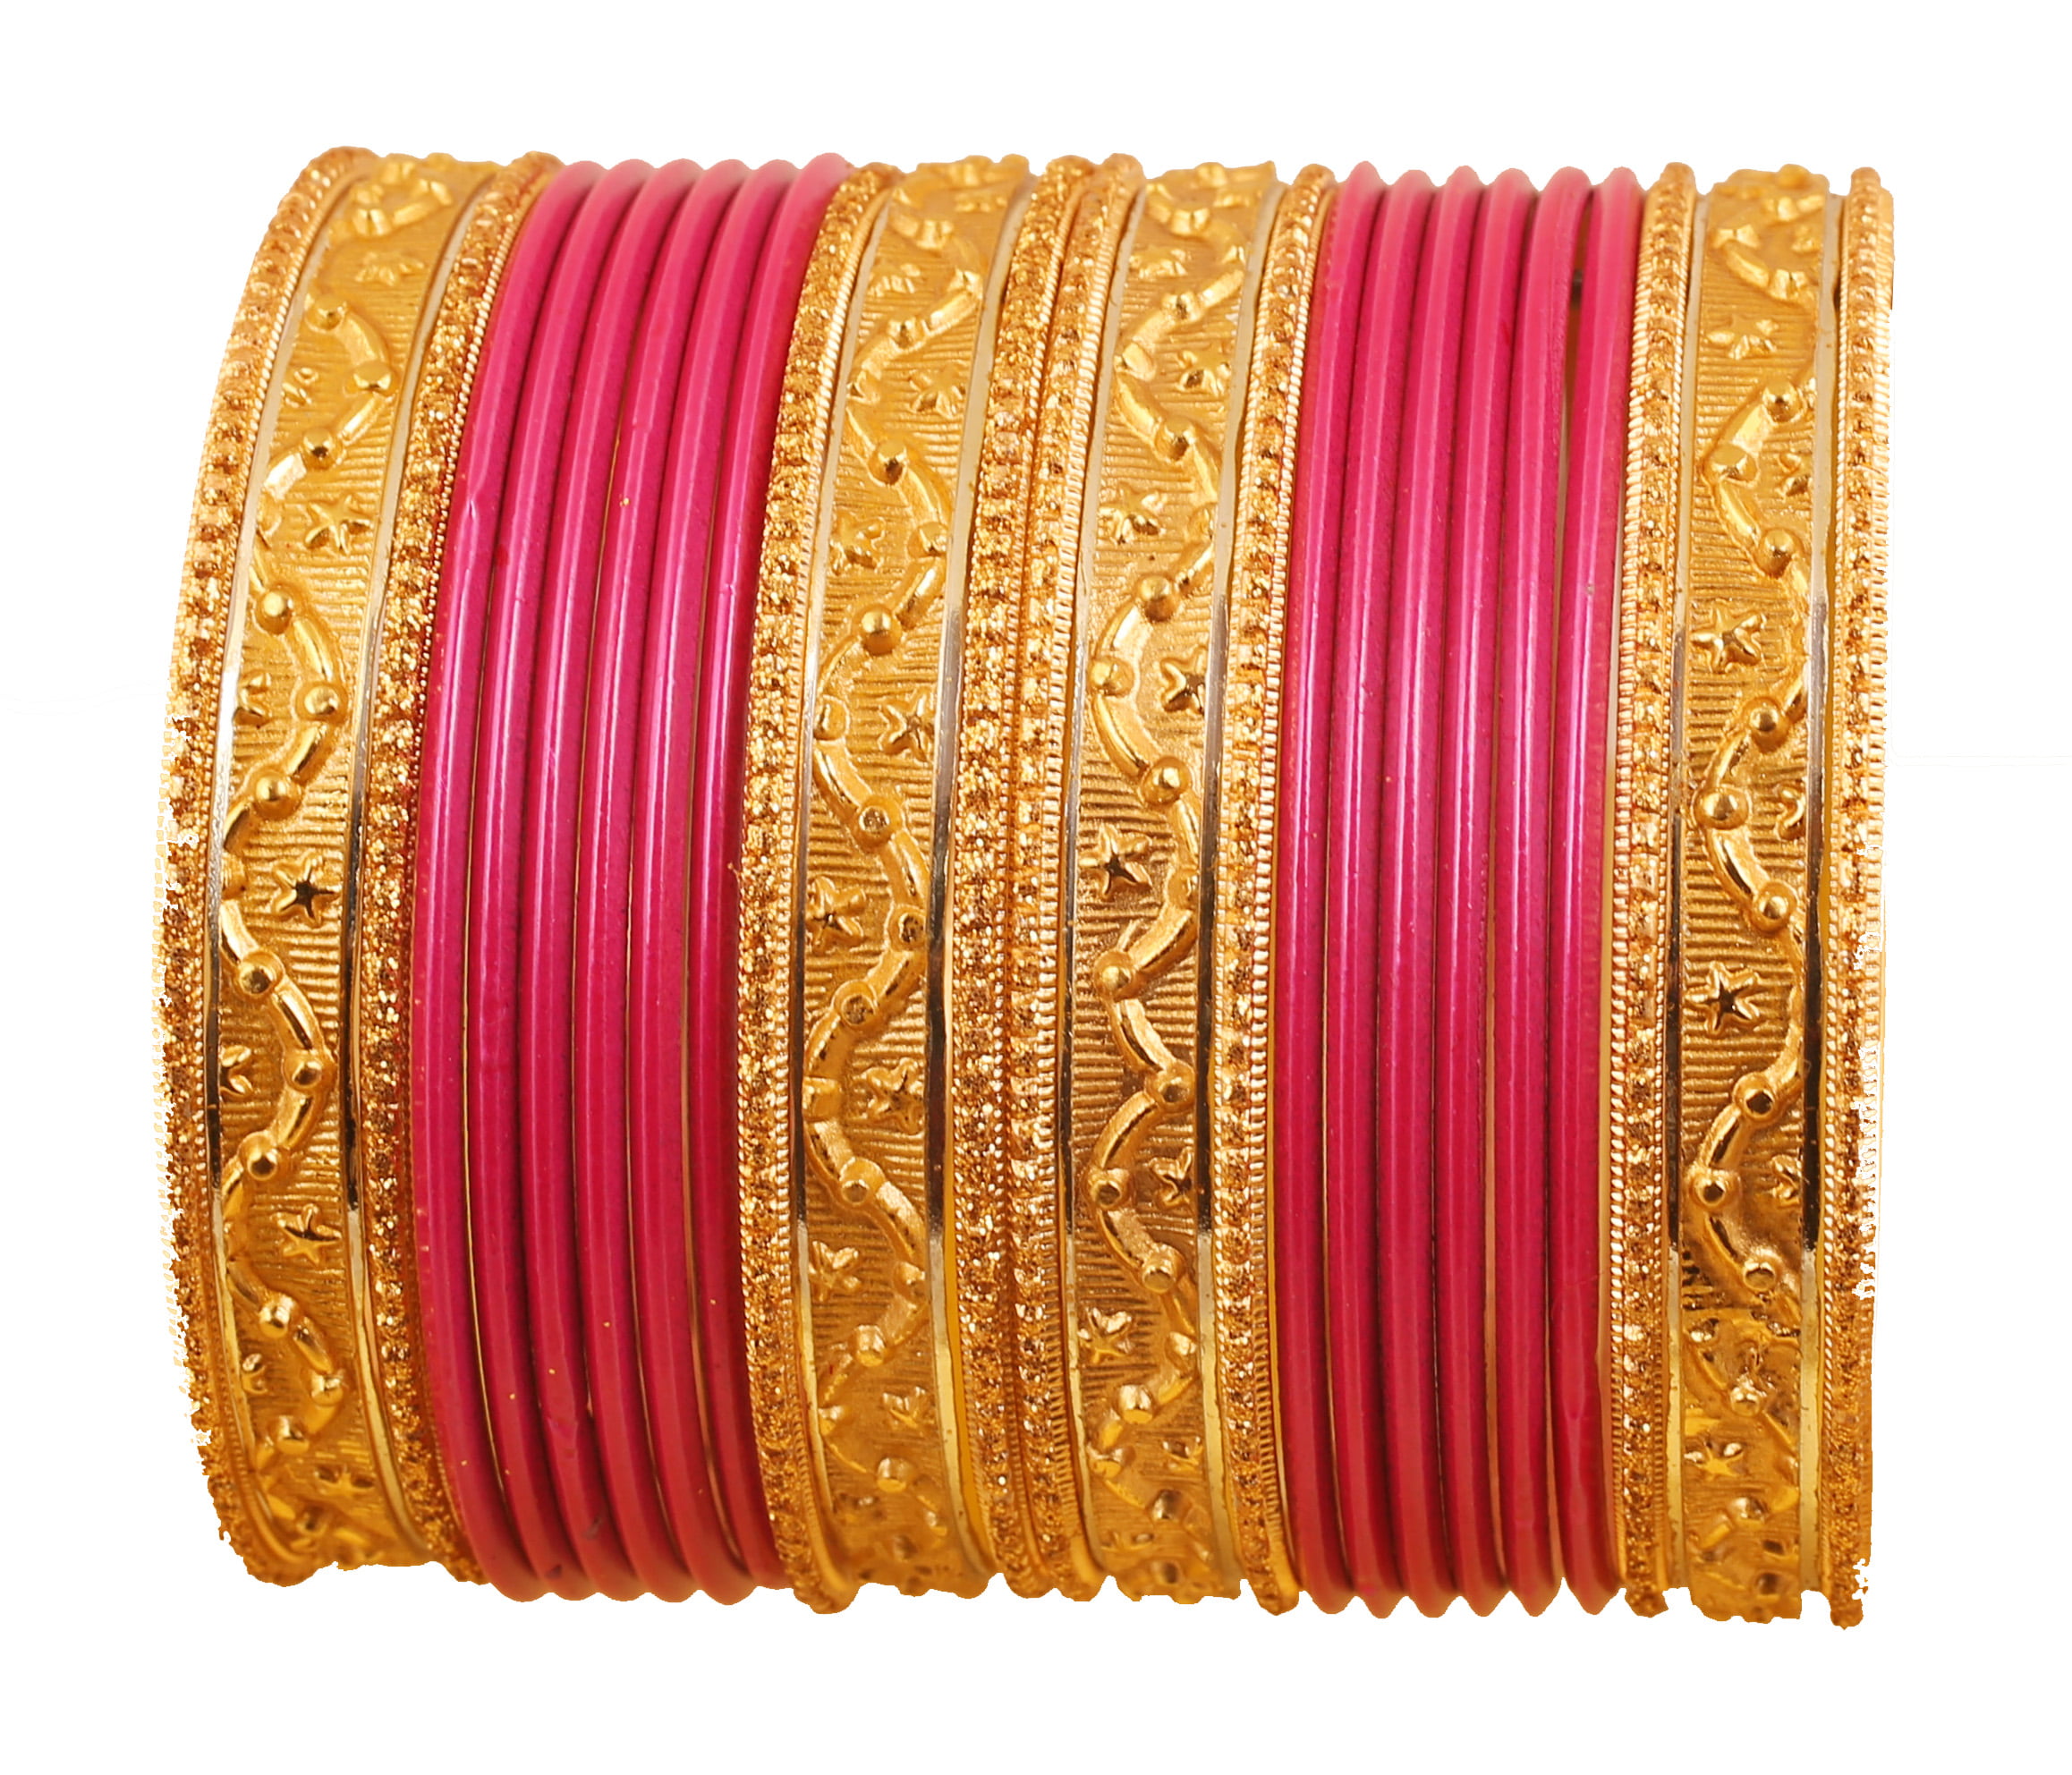 Set of 24 for Women. Touchstone New Colorful Bangle Collection Indian Bollywood Exclusive Golden Glaze Color Designer Jewelry Special Large Size Bangle Bracelets 